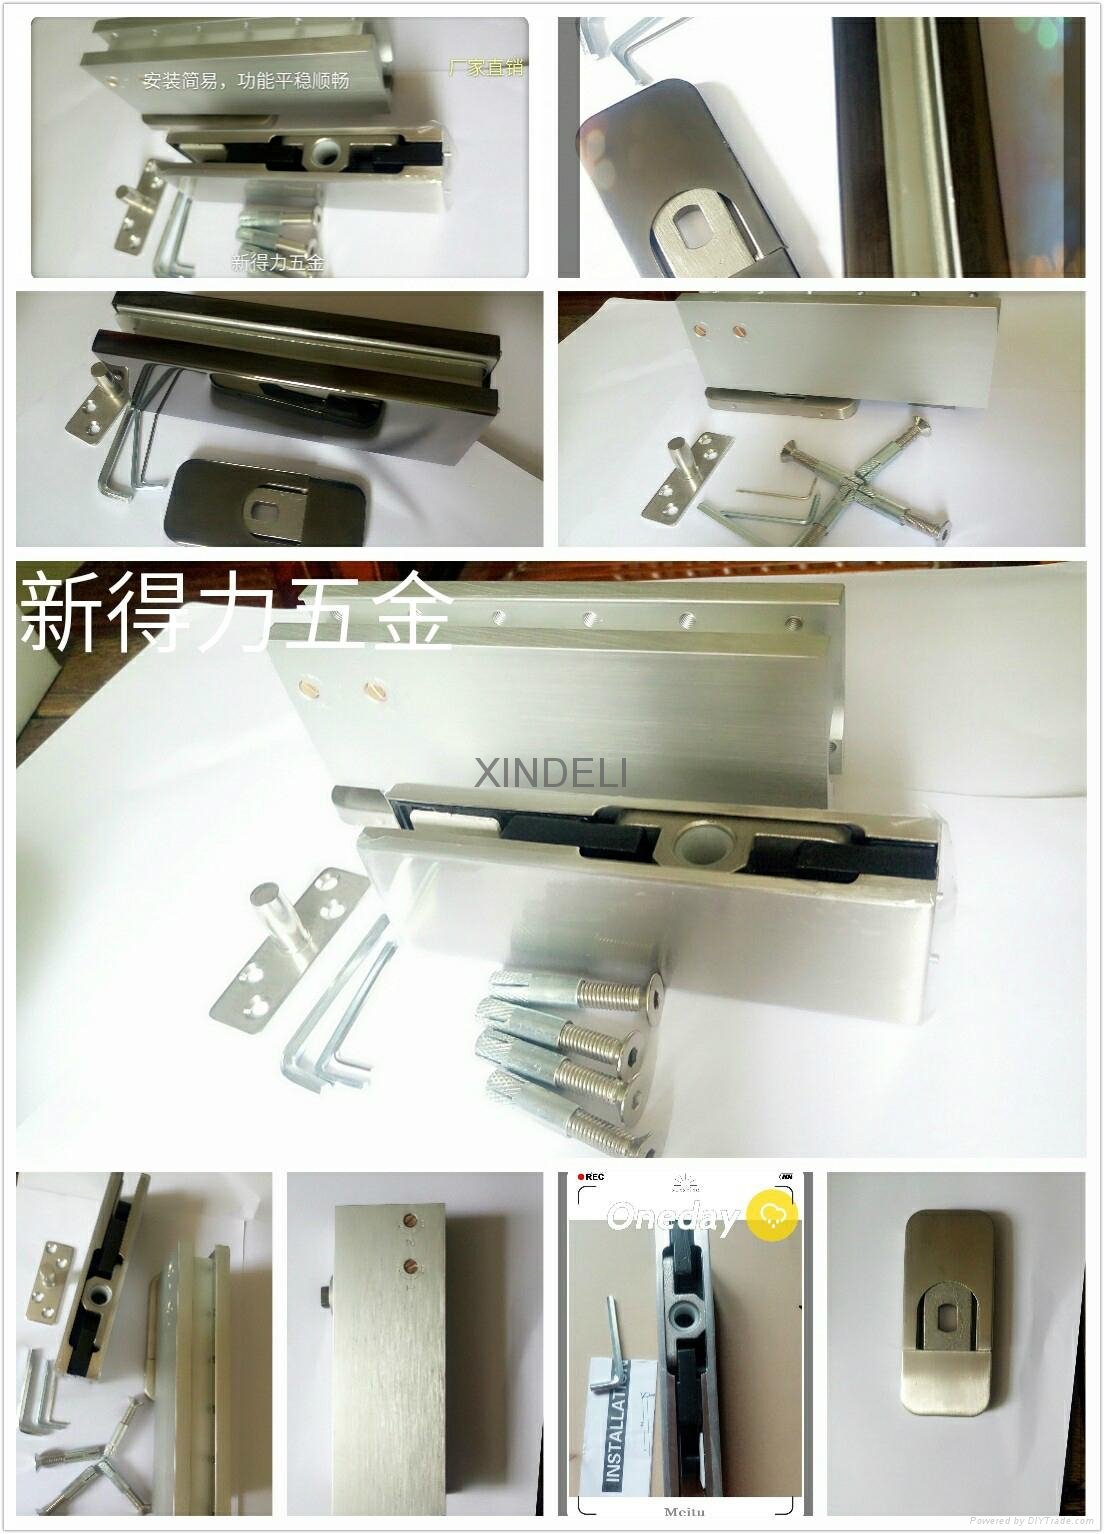 High quality cam door closers for rotating concealed springs